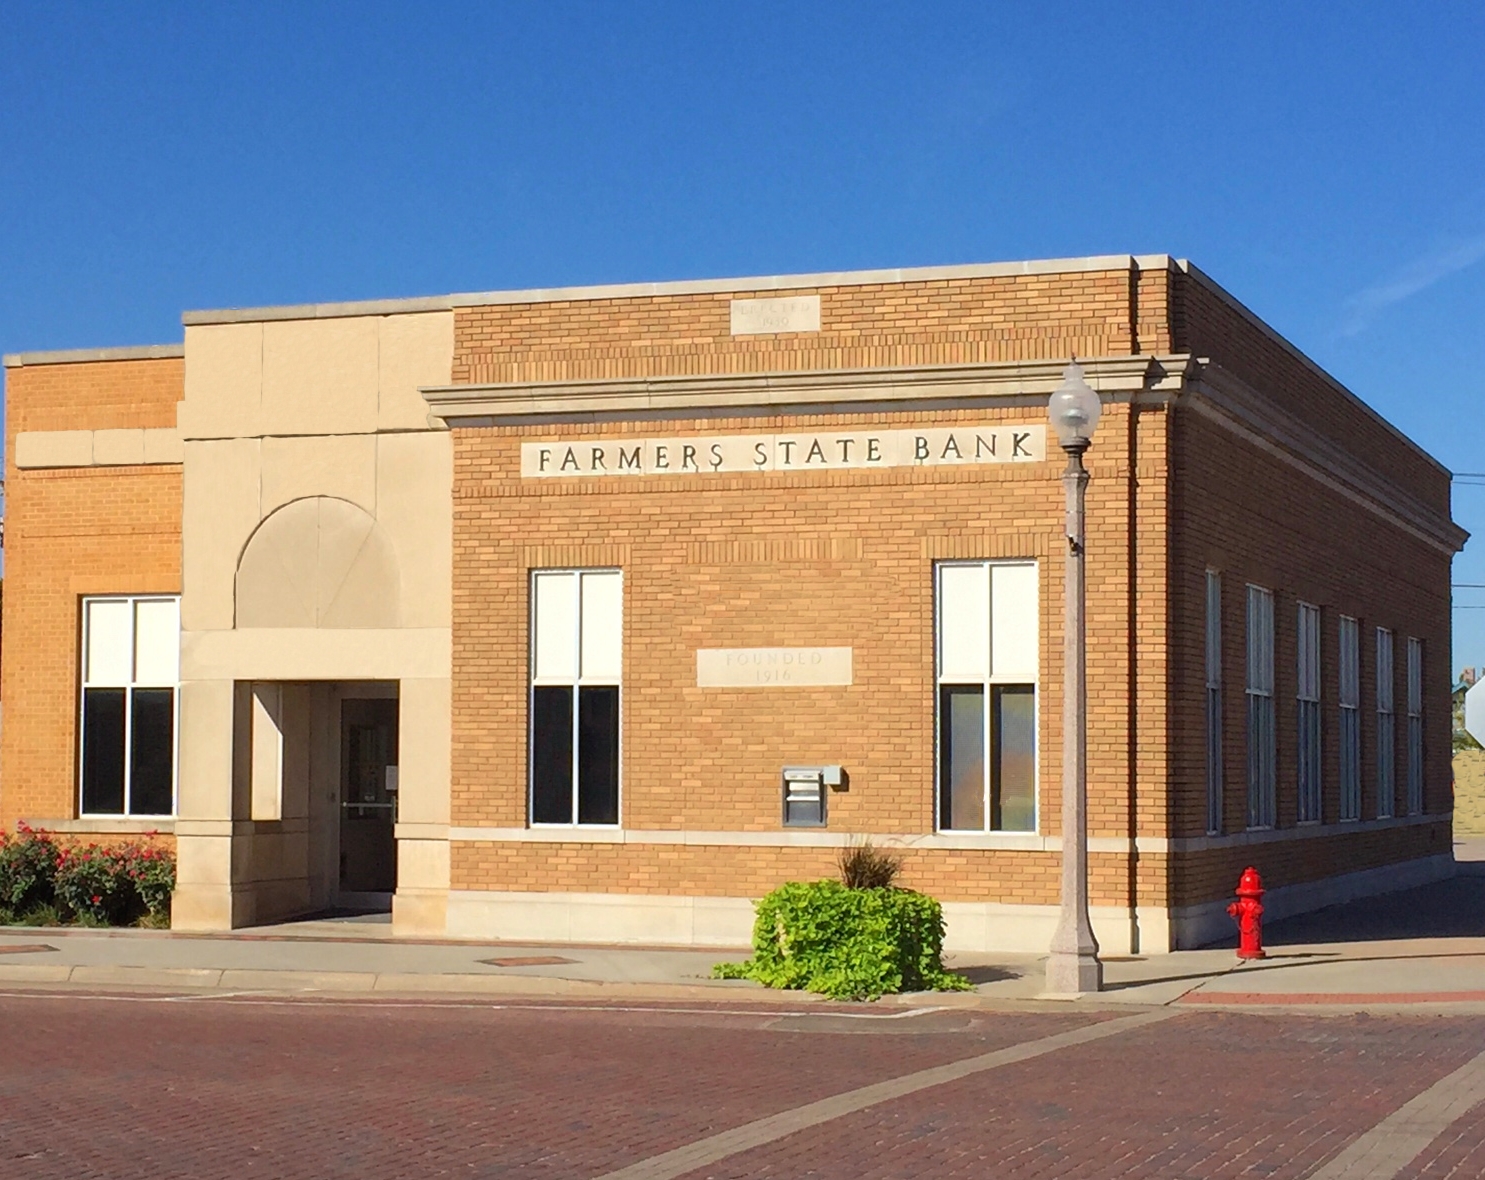 Farmers state bank branch